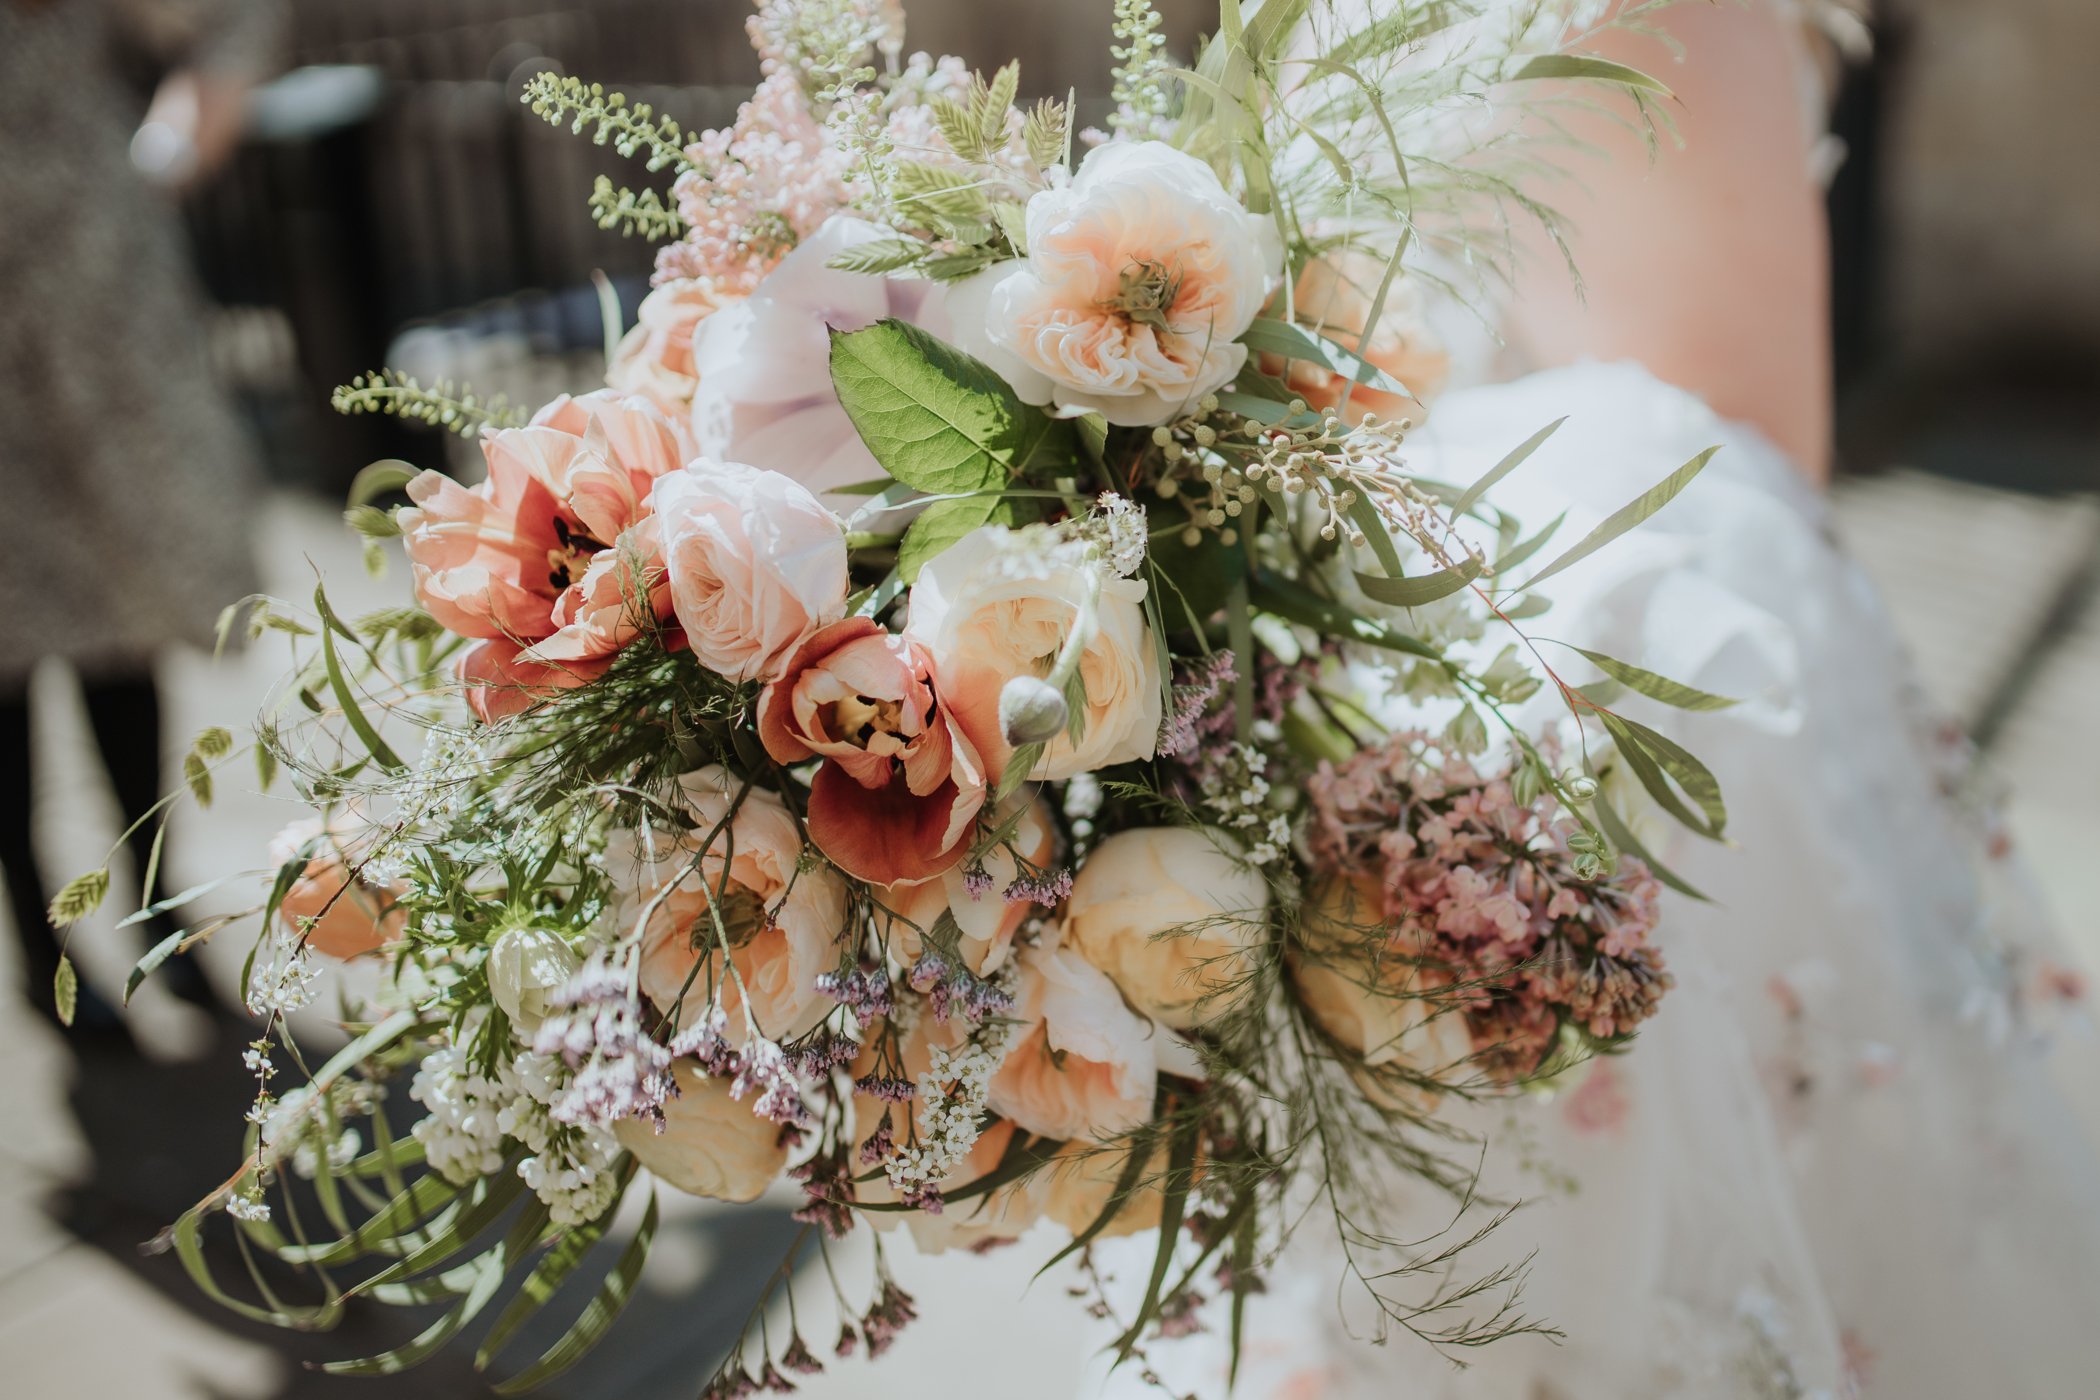 Bridal bouquet in peach and nude